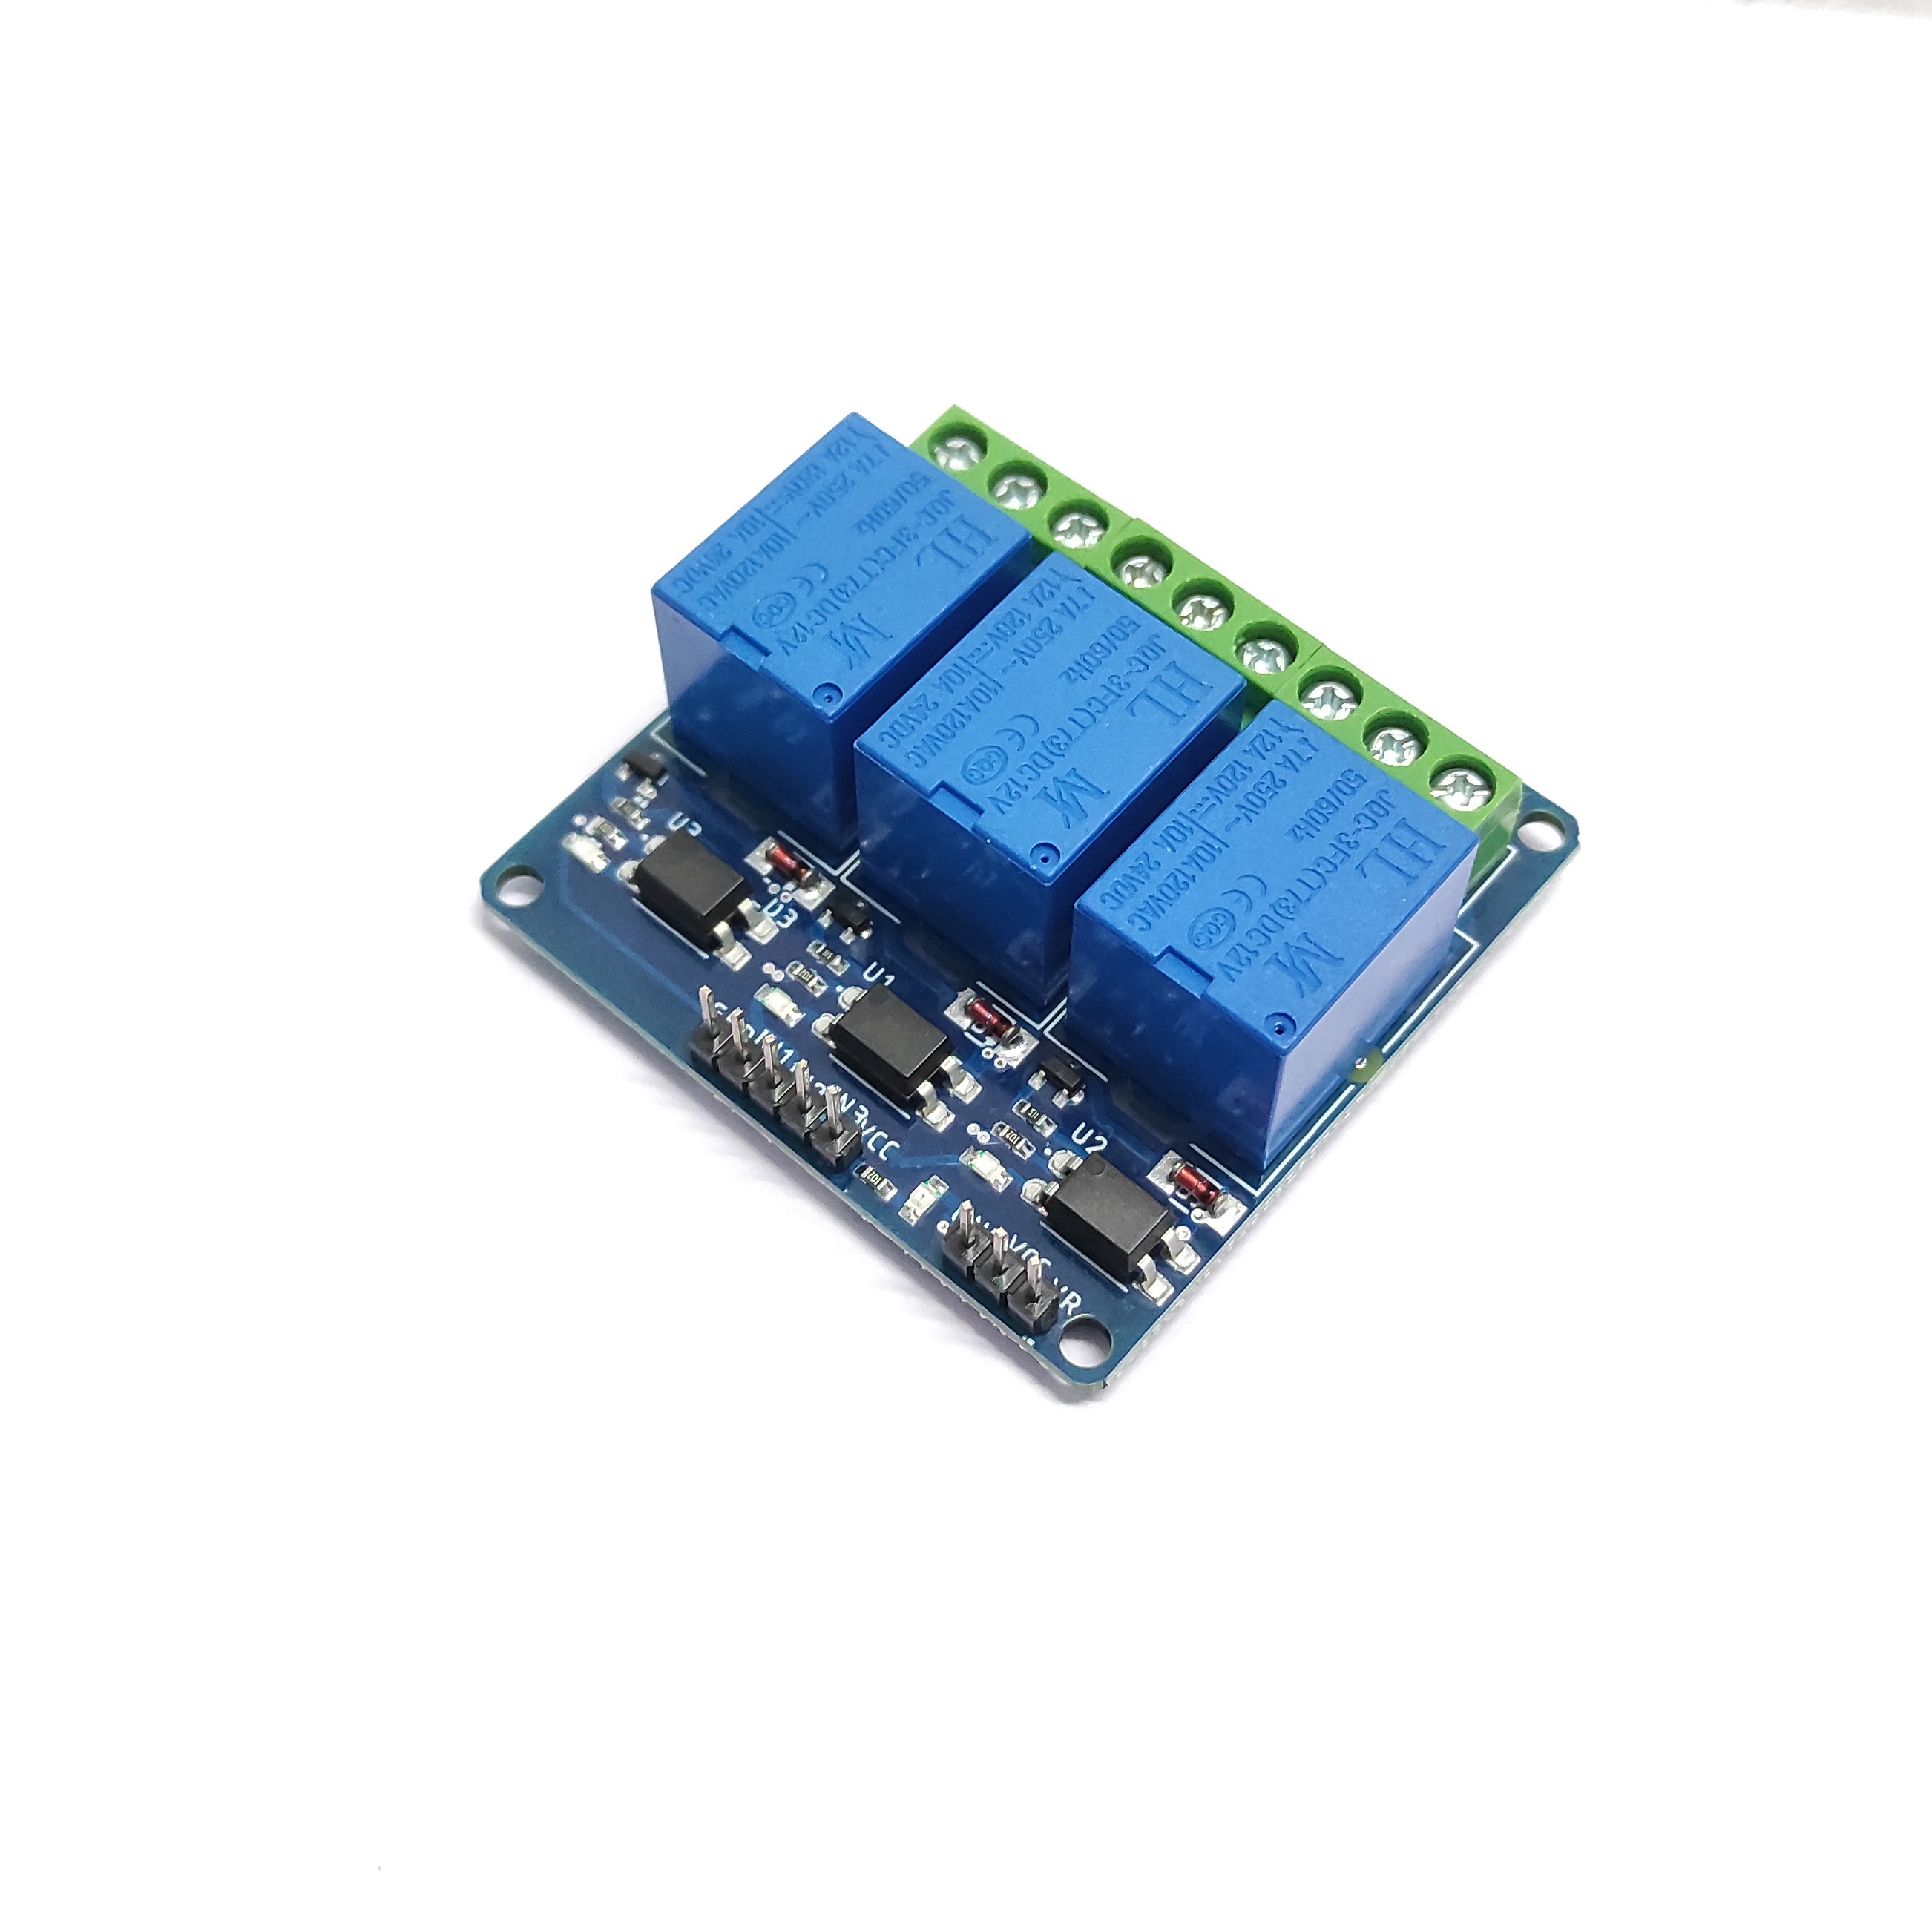 3 Mode Wireless Remote Control Relay - 1 Channel, 12V